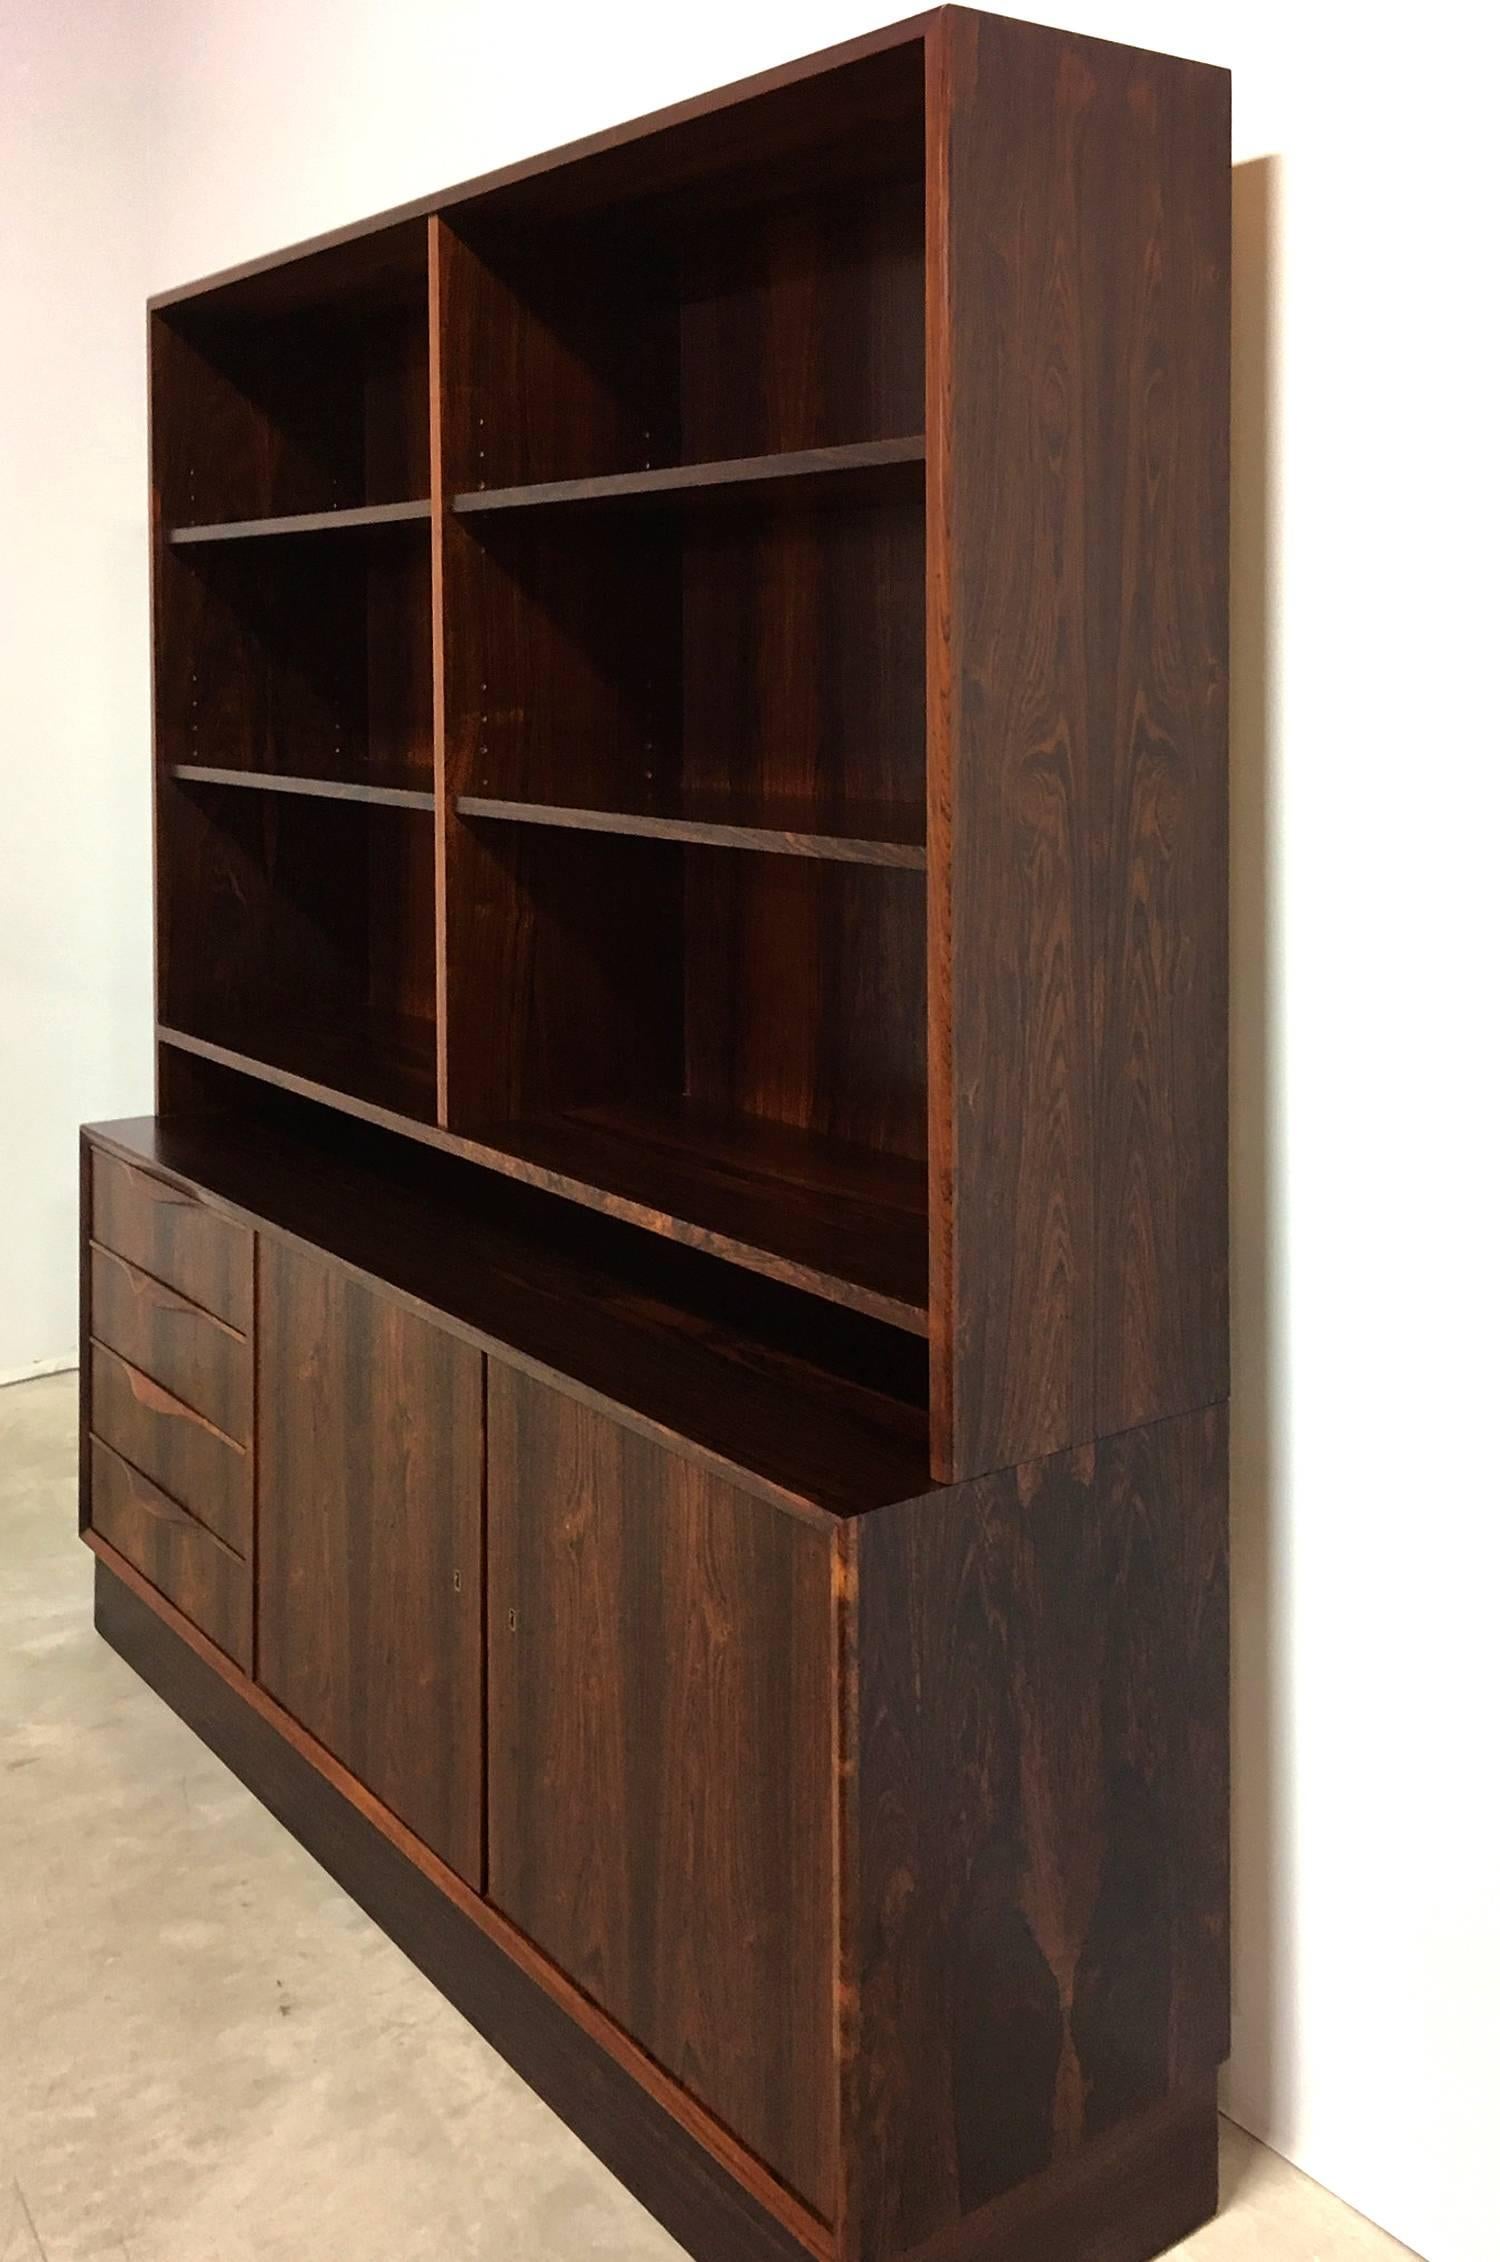 Danish Mid-Century Modern bookcase cabinet of exotic rosewood. The rectangular upper case fitted with shelves that adjust, above the lower case with two doors, opening to shelved interior right half, and a bank of four drawers on the left side. The